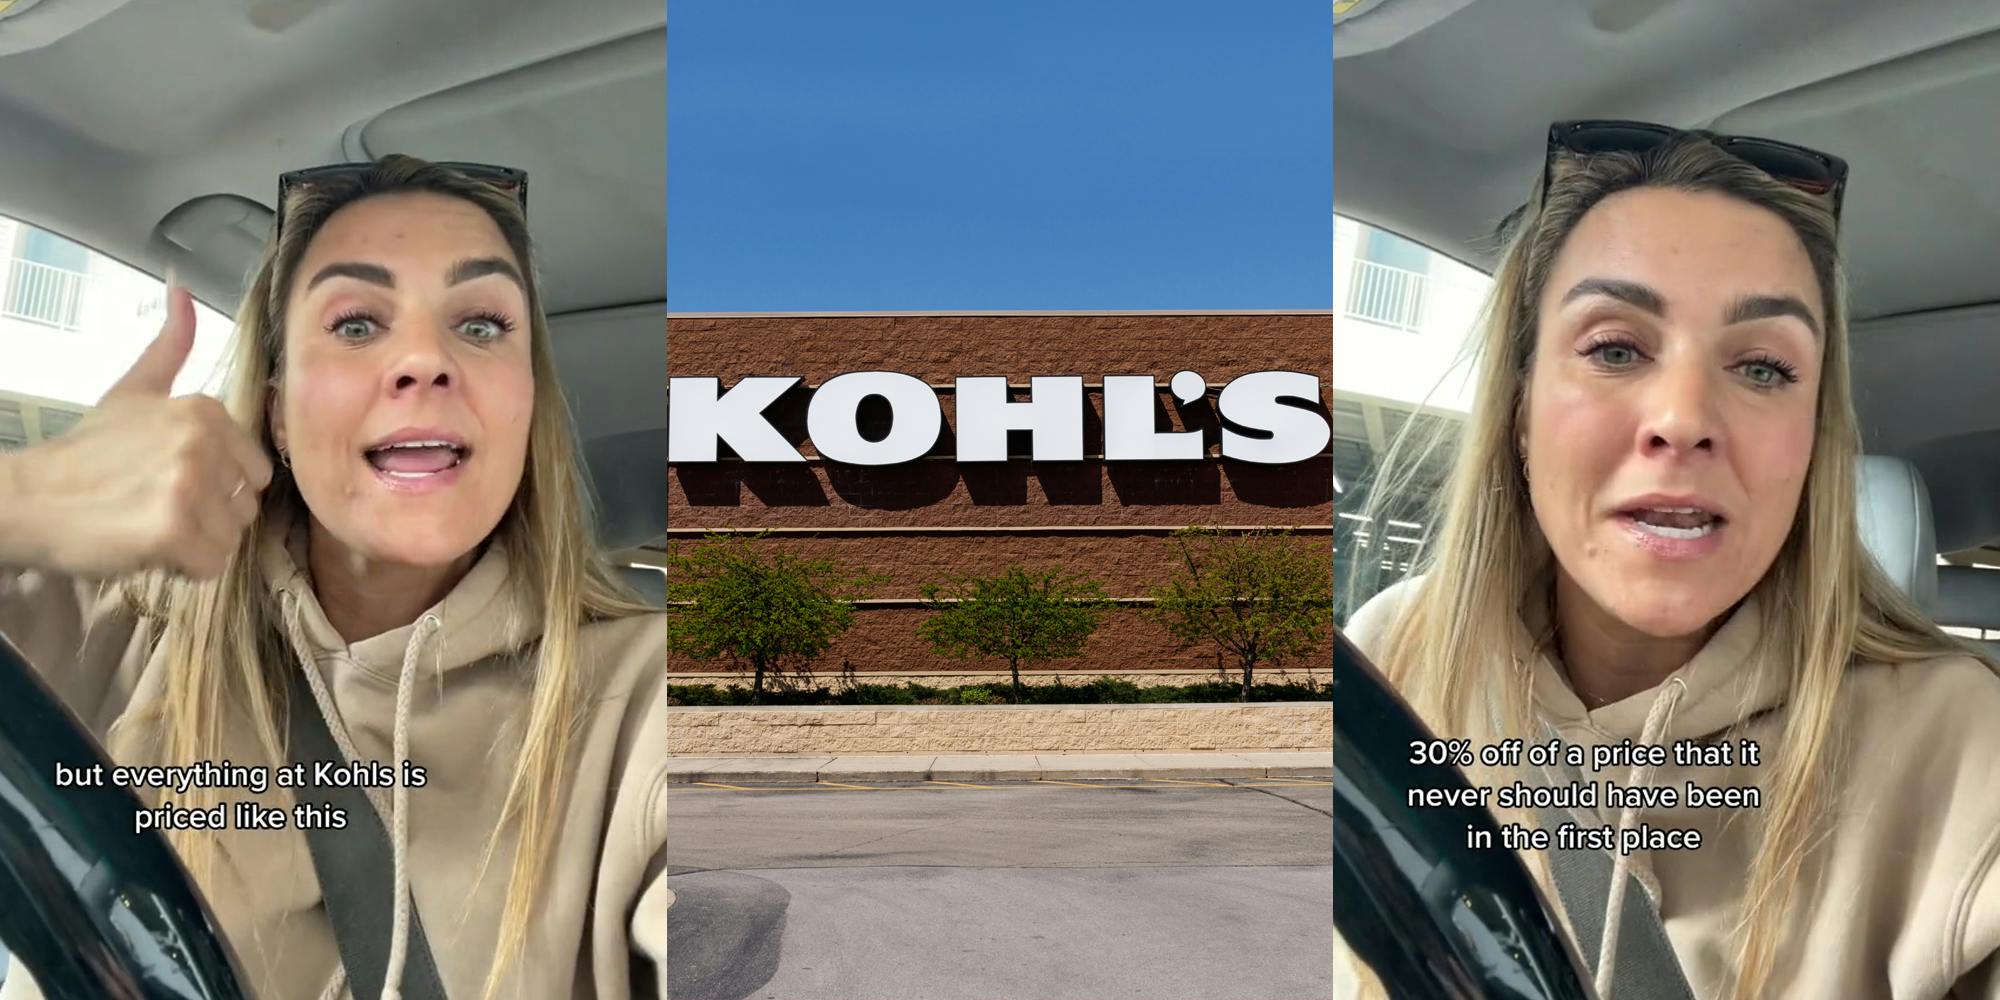 woman speaking in car caption "but everything at Kohls is priced like this" (l) Kohl's sign on building with blue sky (c) woman speaking in car caption "30% off a price that it never should have been in the first place" (r)